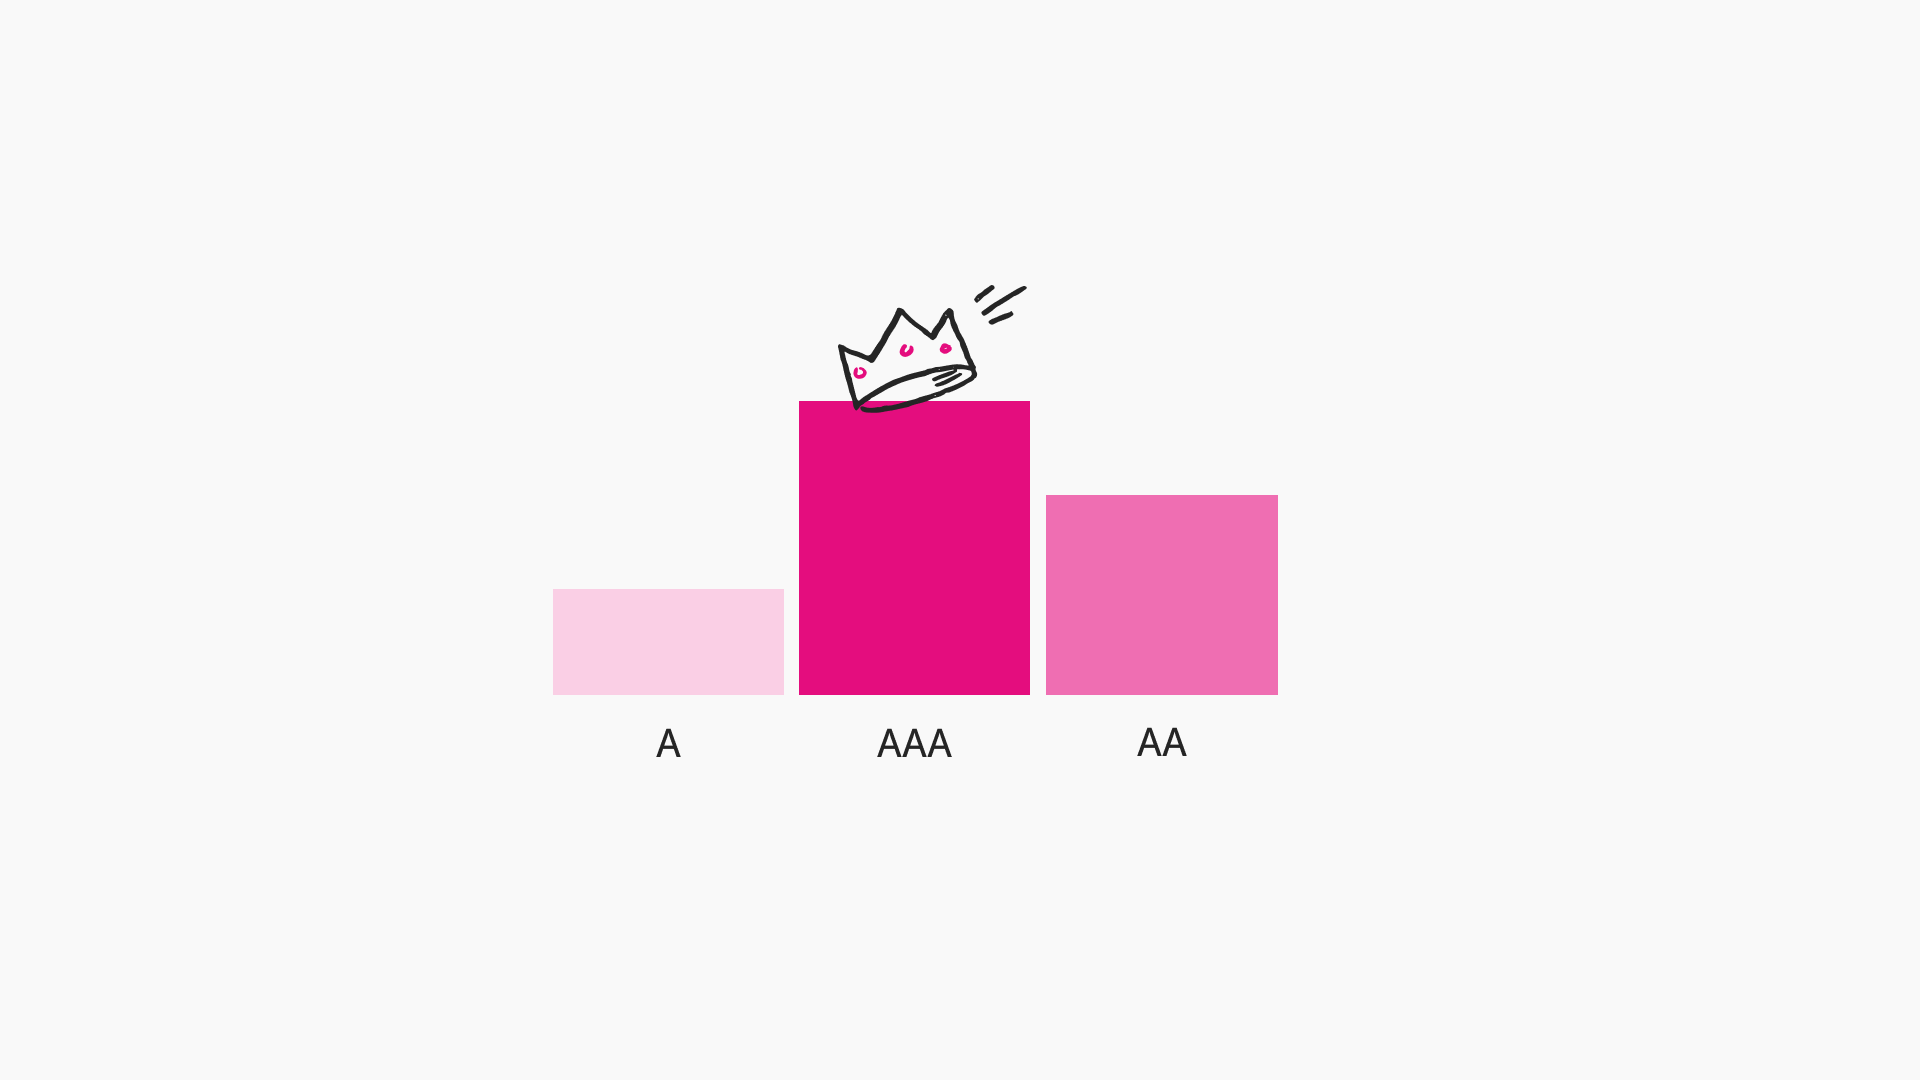 A bar chart with three bars in varying shades of pink, each labeled with a different level of accessibility standards: 'A', 'AA', and 'AAA'. The 'A' bar is the shortest, 'AA' is taller, and 'AAA' is the tallest, indicating progressively higher levels of accessibility compliance. Atop the tallest bar is a simple line drawing of a crown, suggesting that 'AAA' is the highest or most desirable standard. The background is white, and the overall design is minimalistic and playful